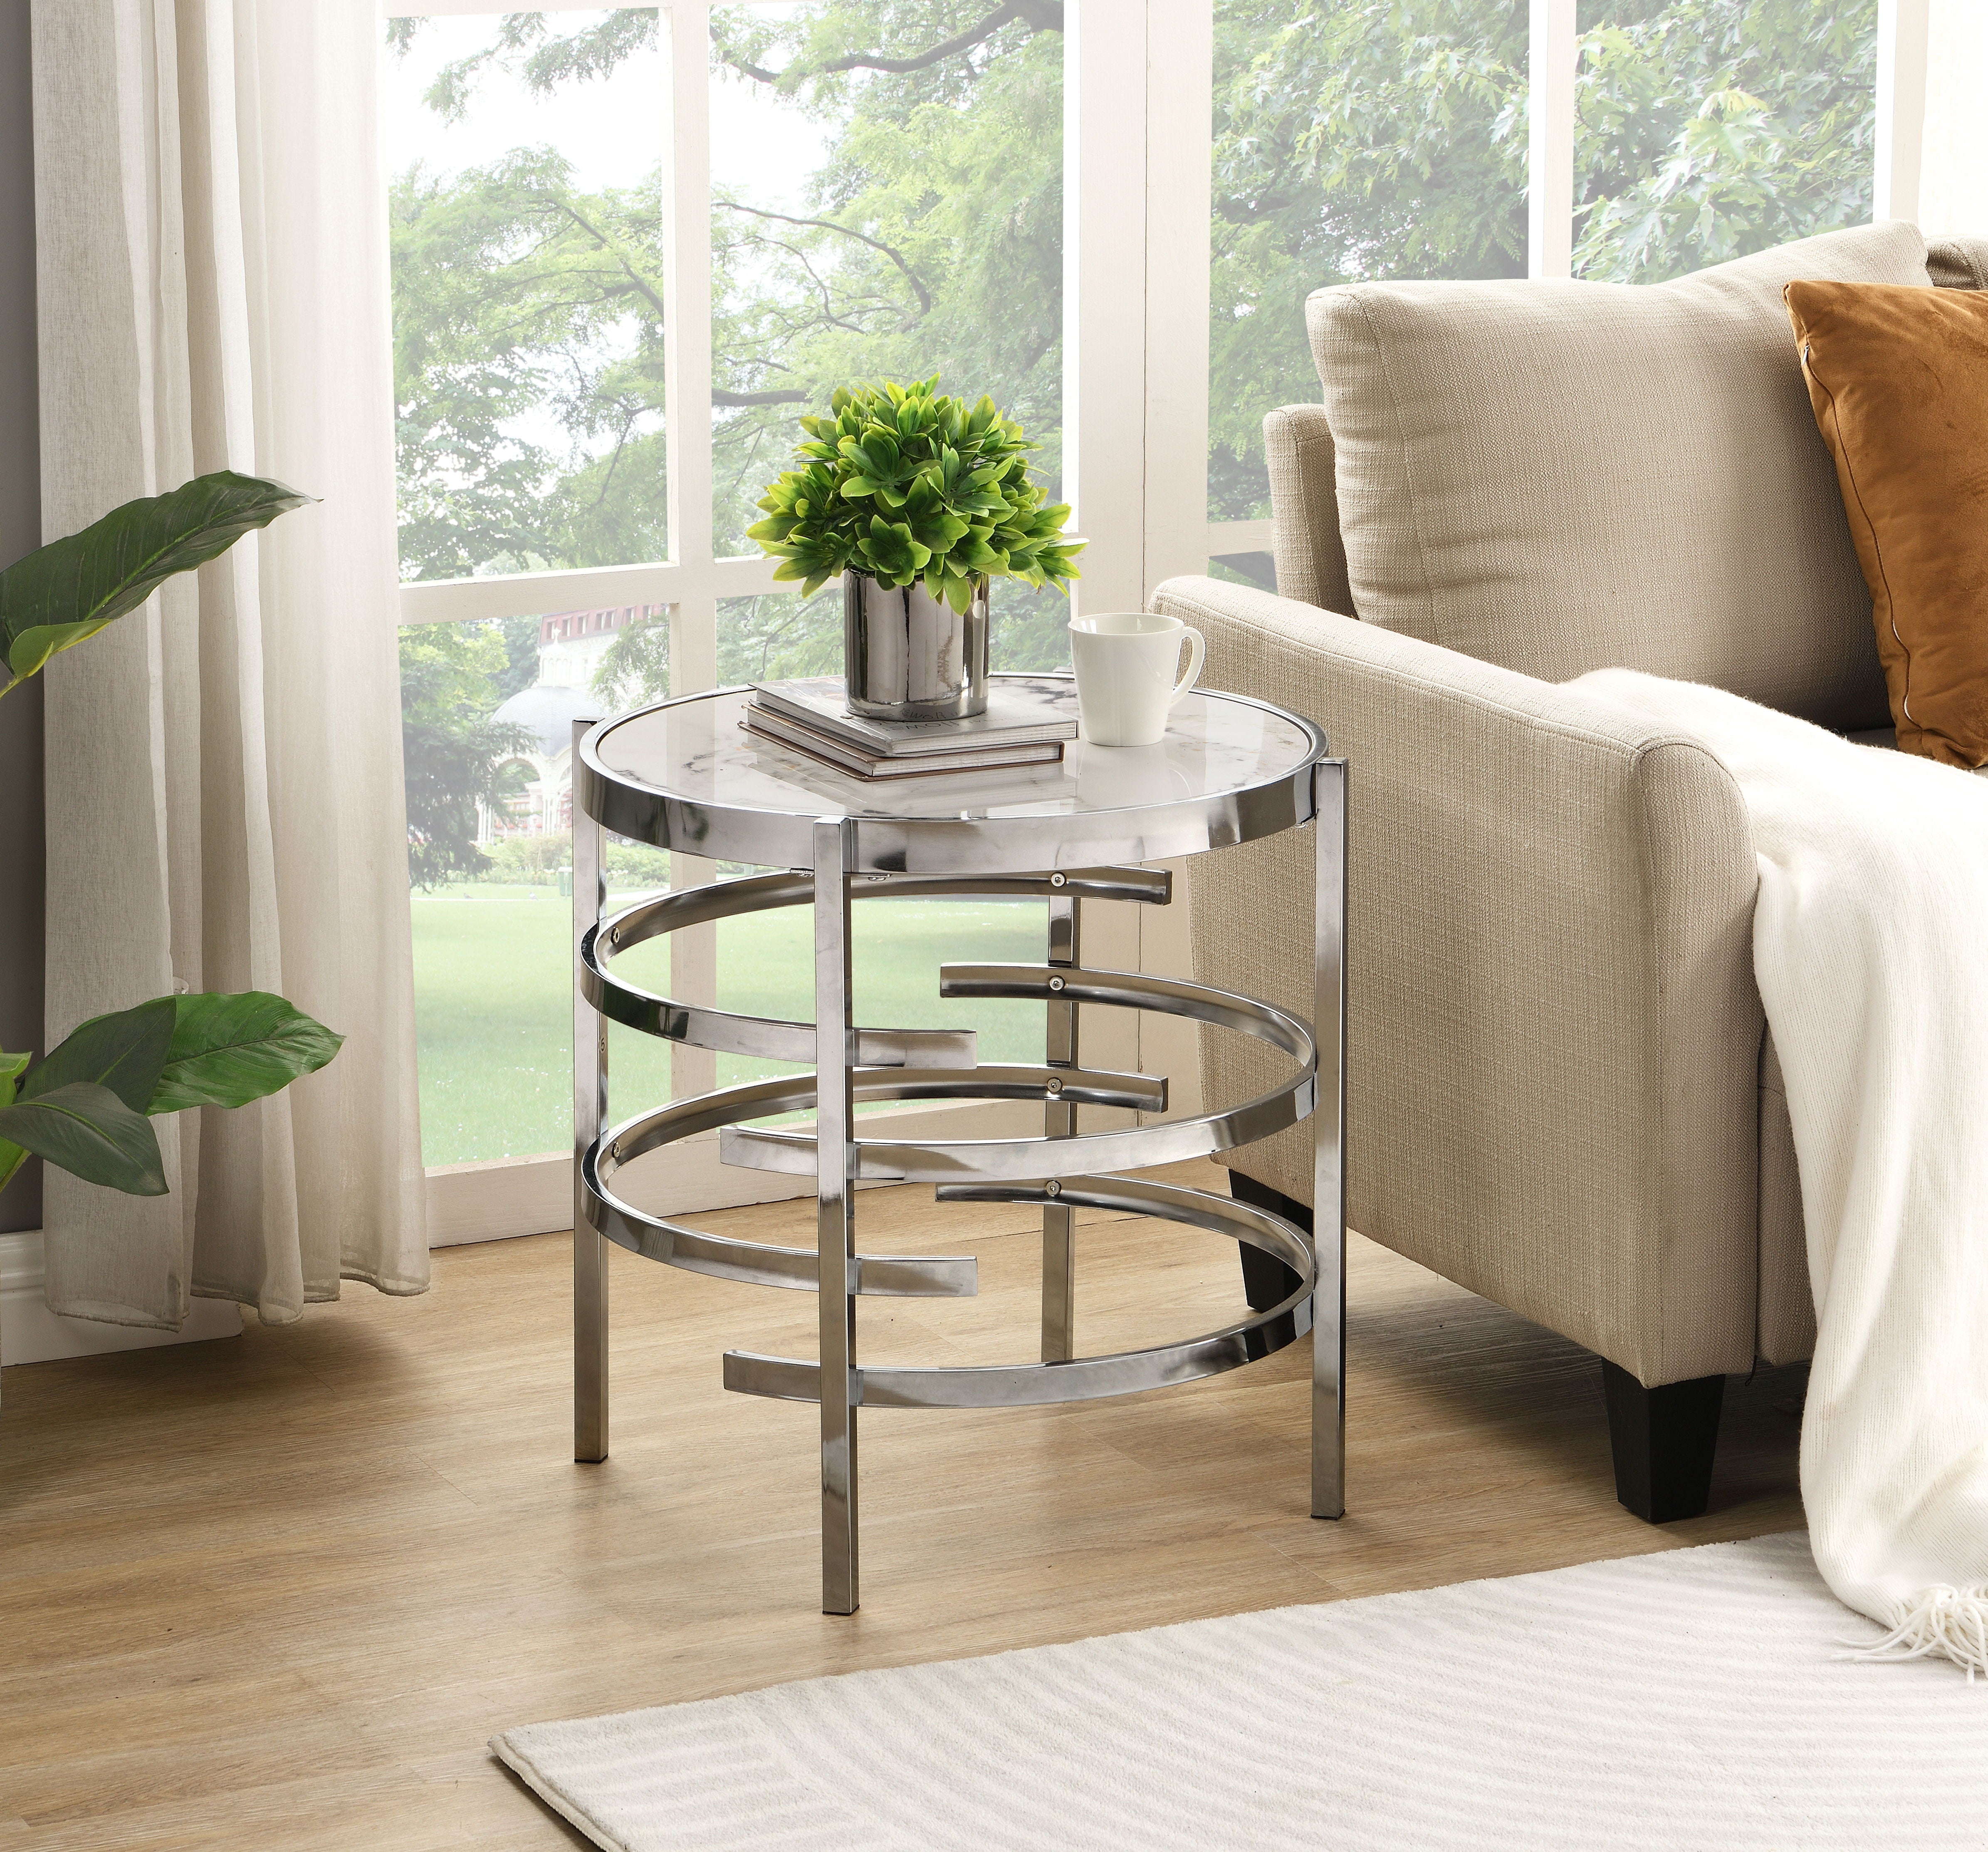 Modern Round End Table With Sintered Stone Top, Chrome/Silver End Table For Living Room